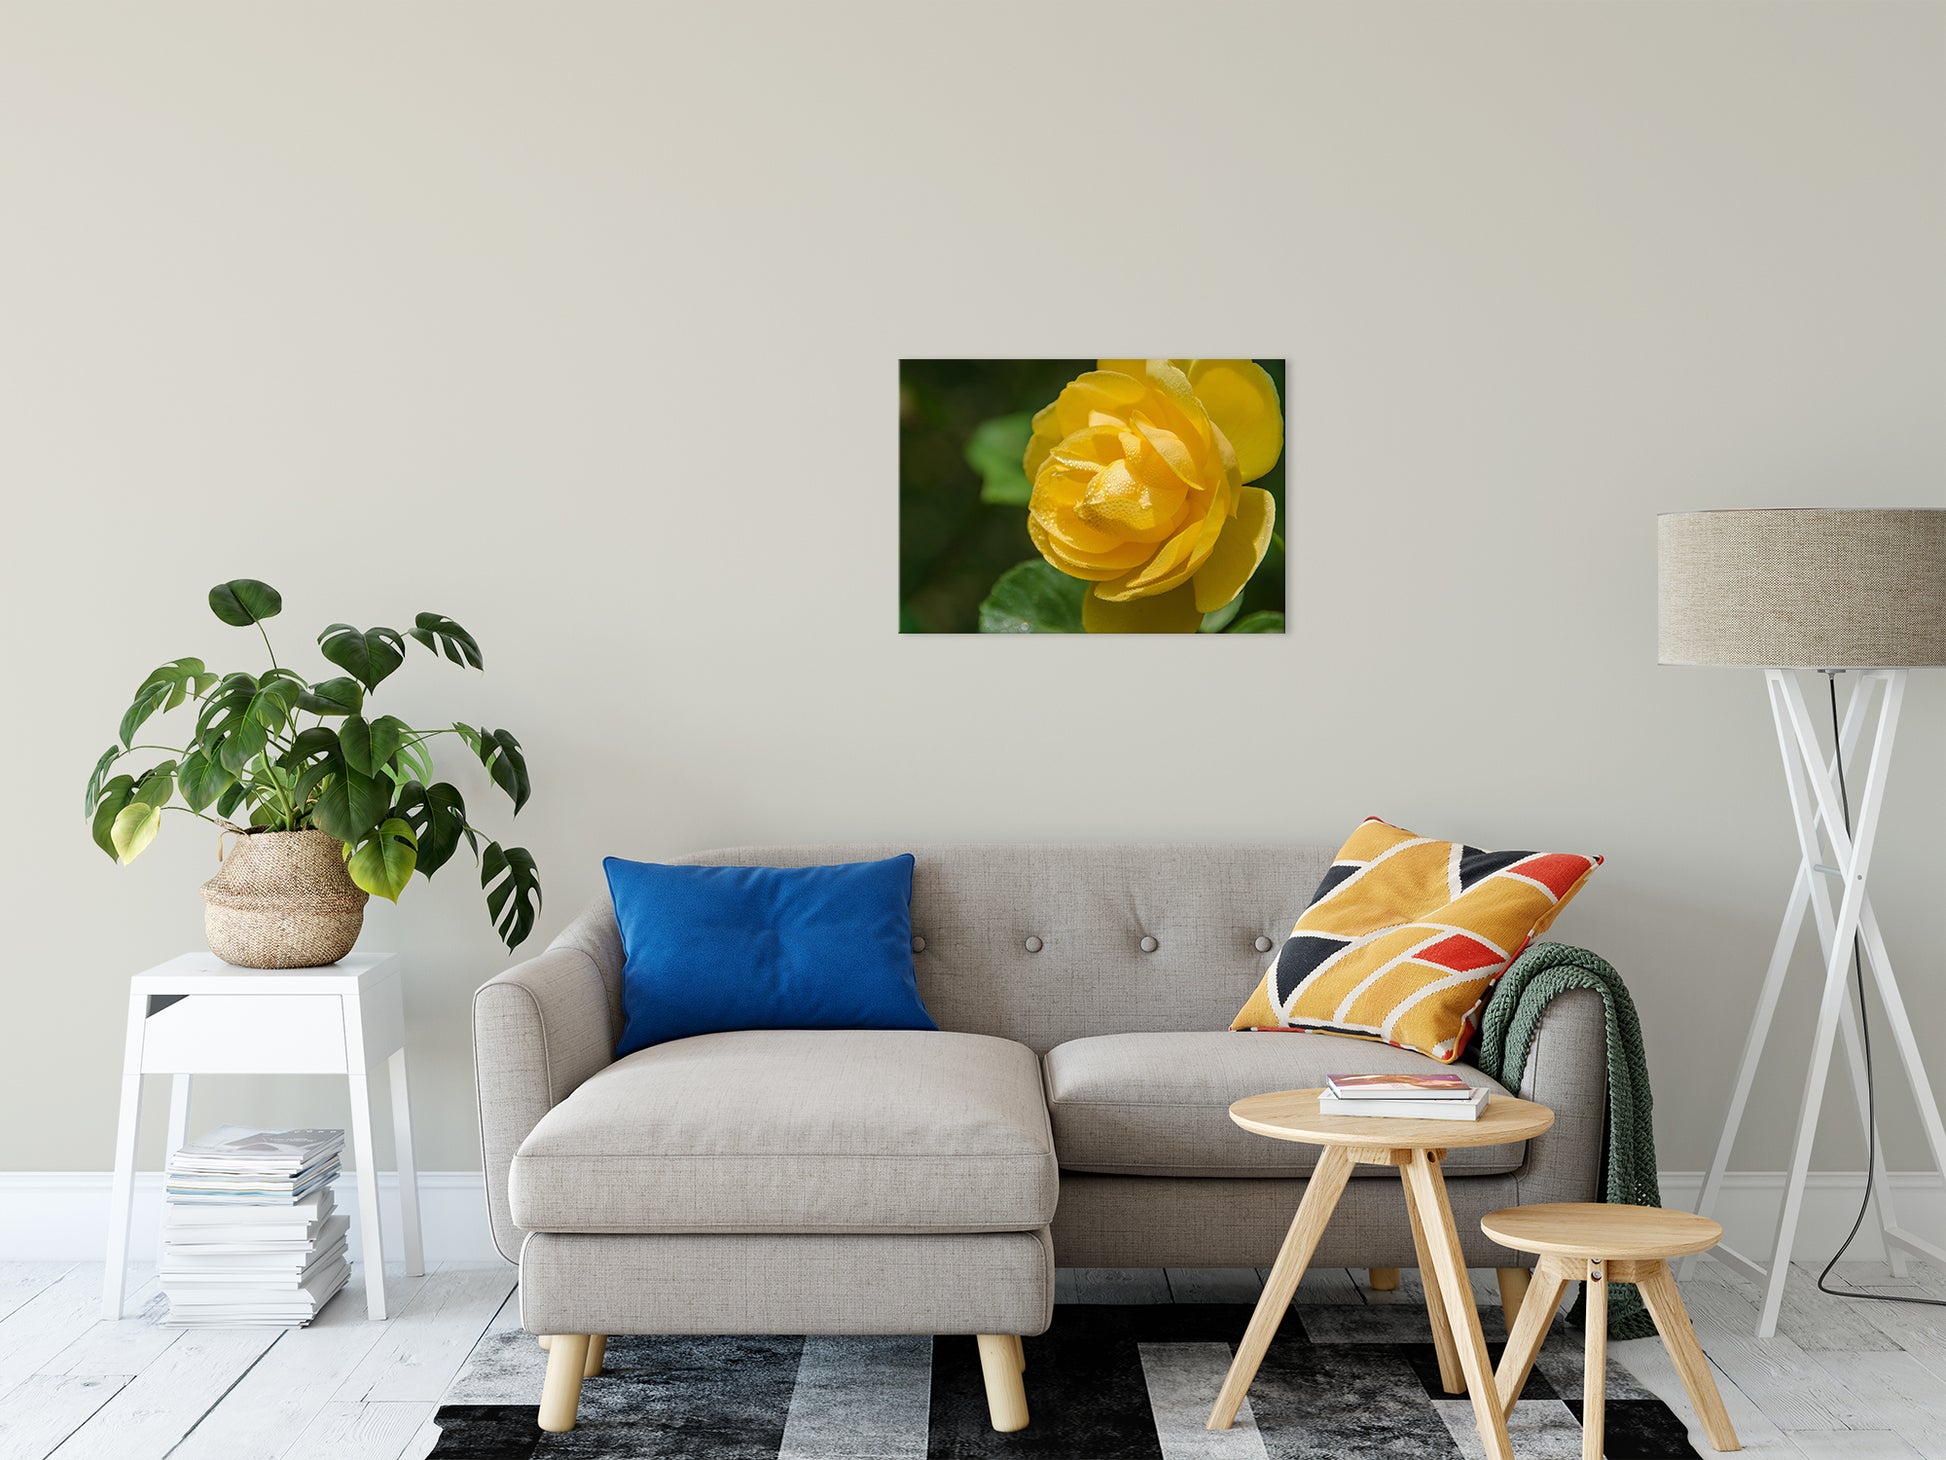 Friendship Rose Nature / Floral Photo Fine Art Canvas Wall Art Prints 20" x 30" - PIPAFINEART